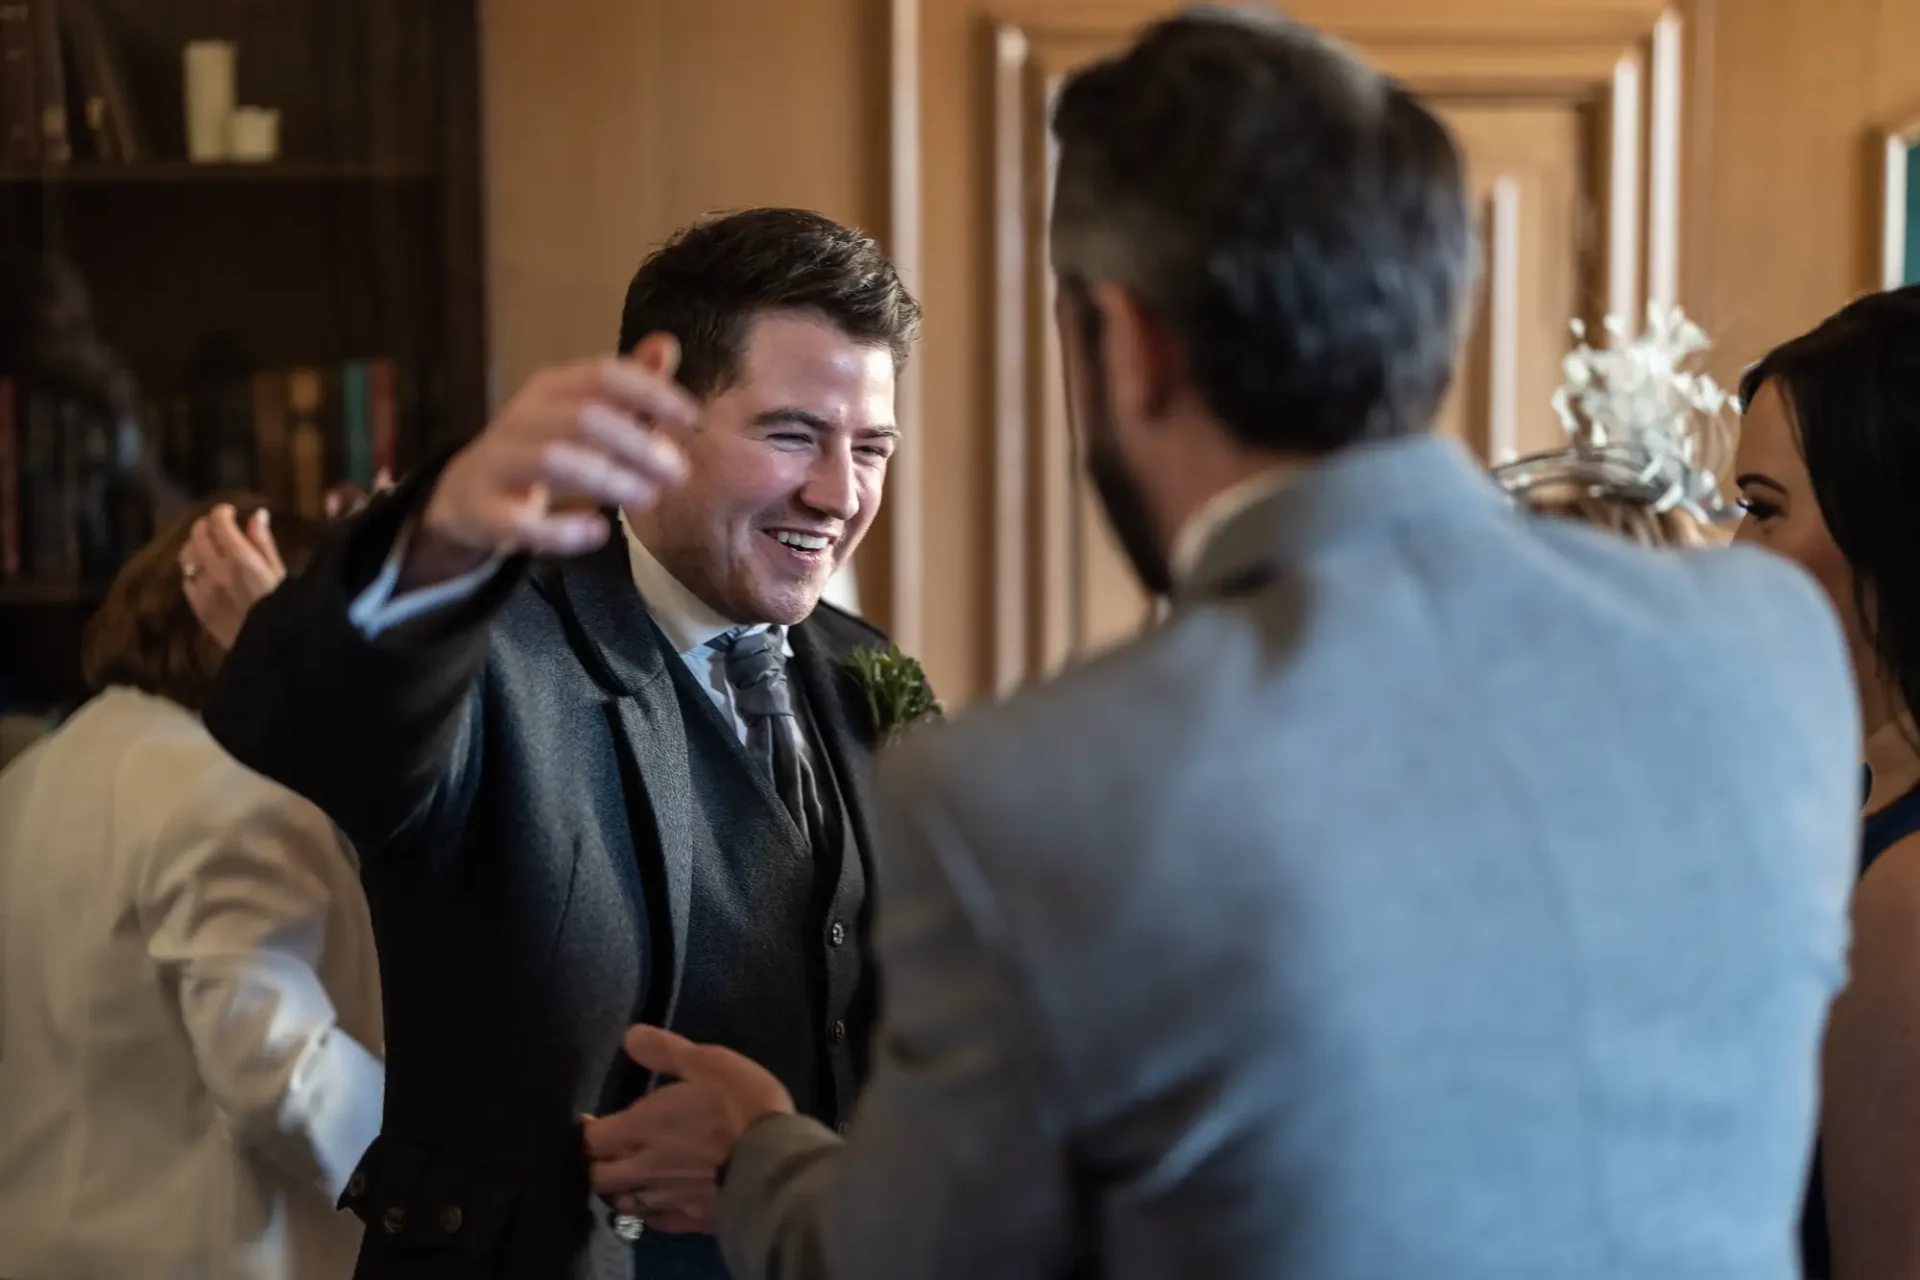 A man in a suit smiles and gestures while talking to another man at a social gathering.